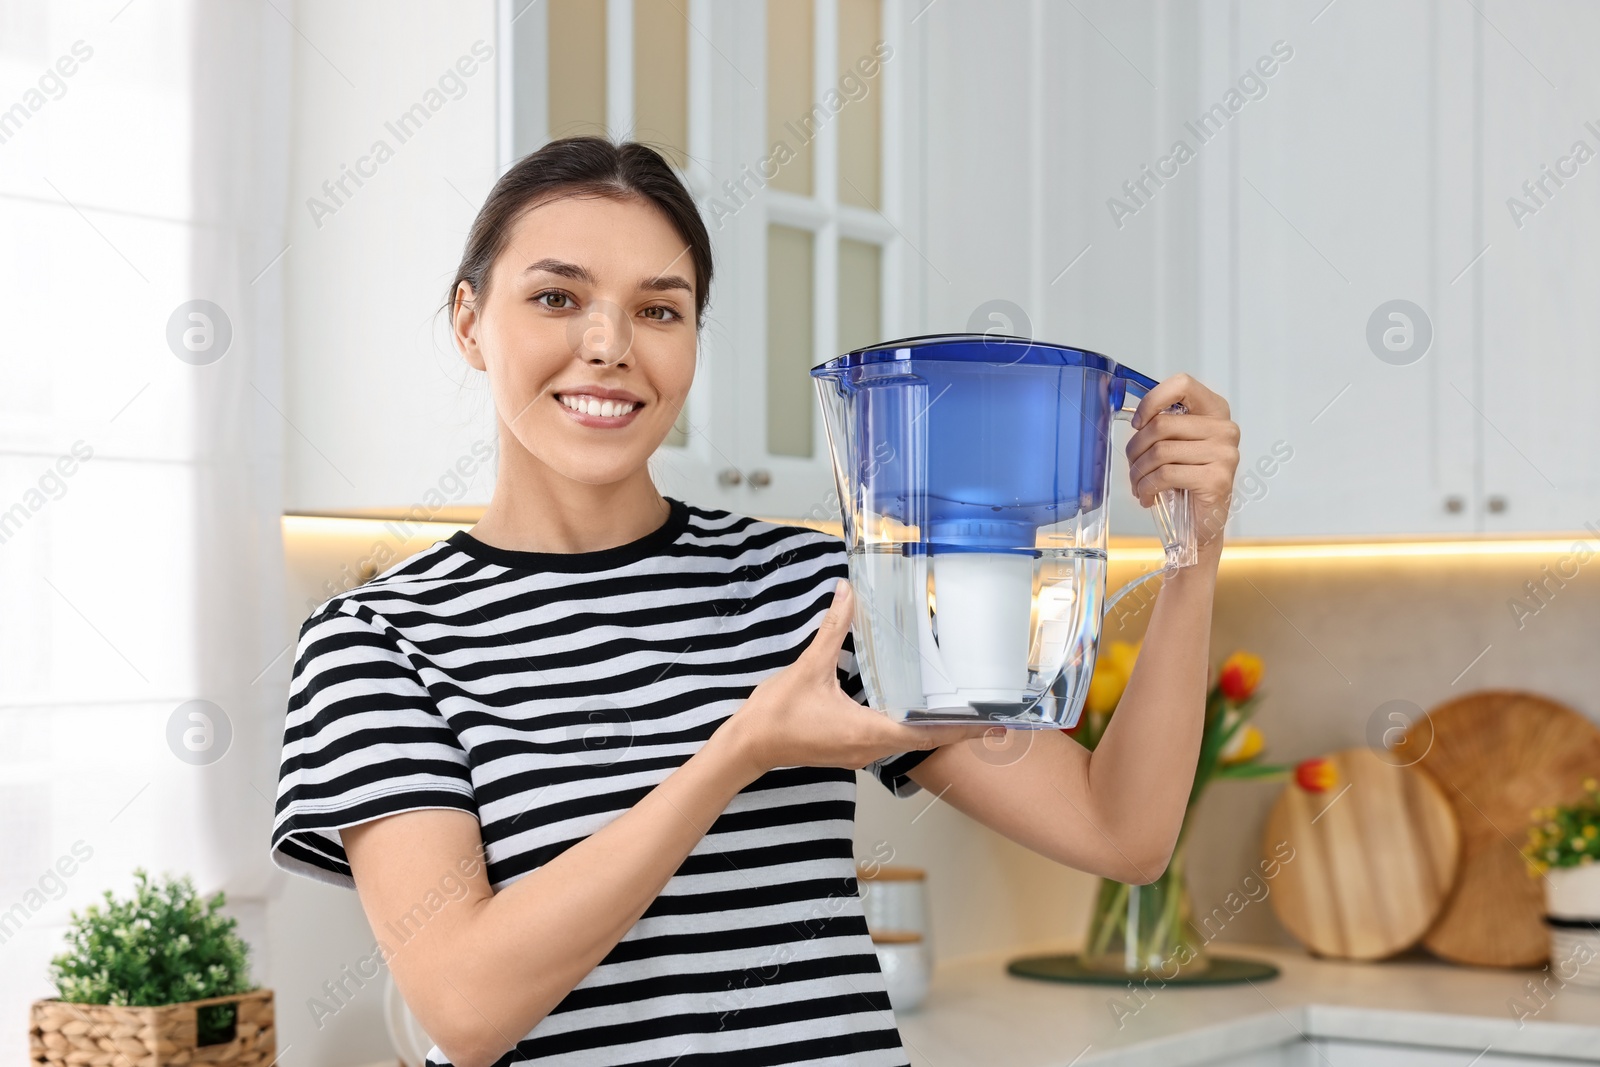 Photo of Woman holding filter jug with water in kitchen